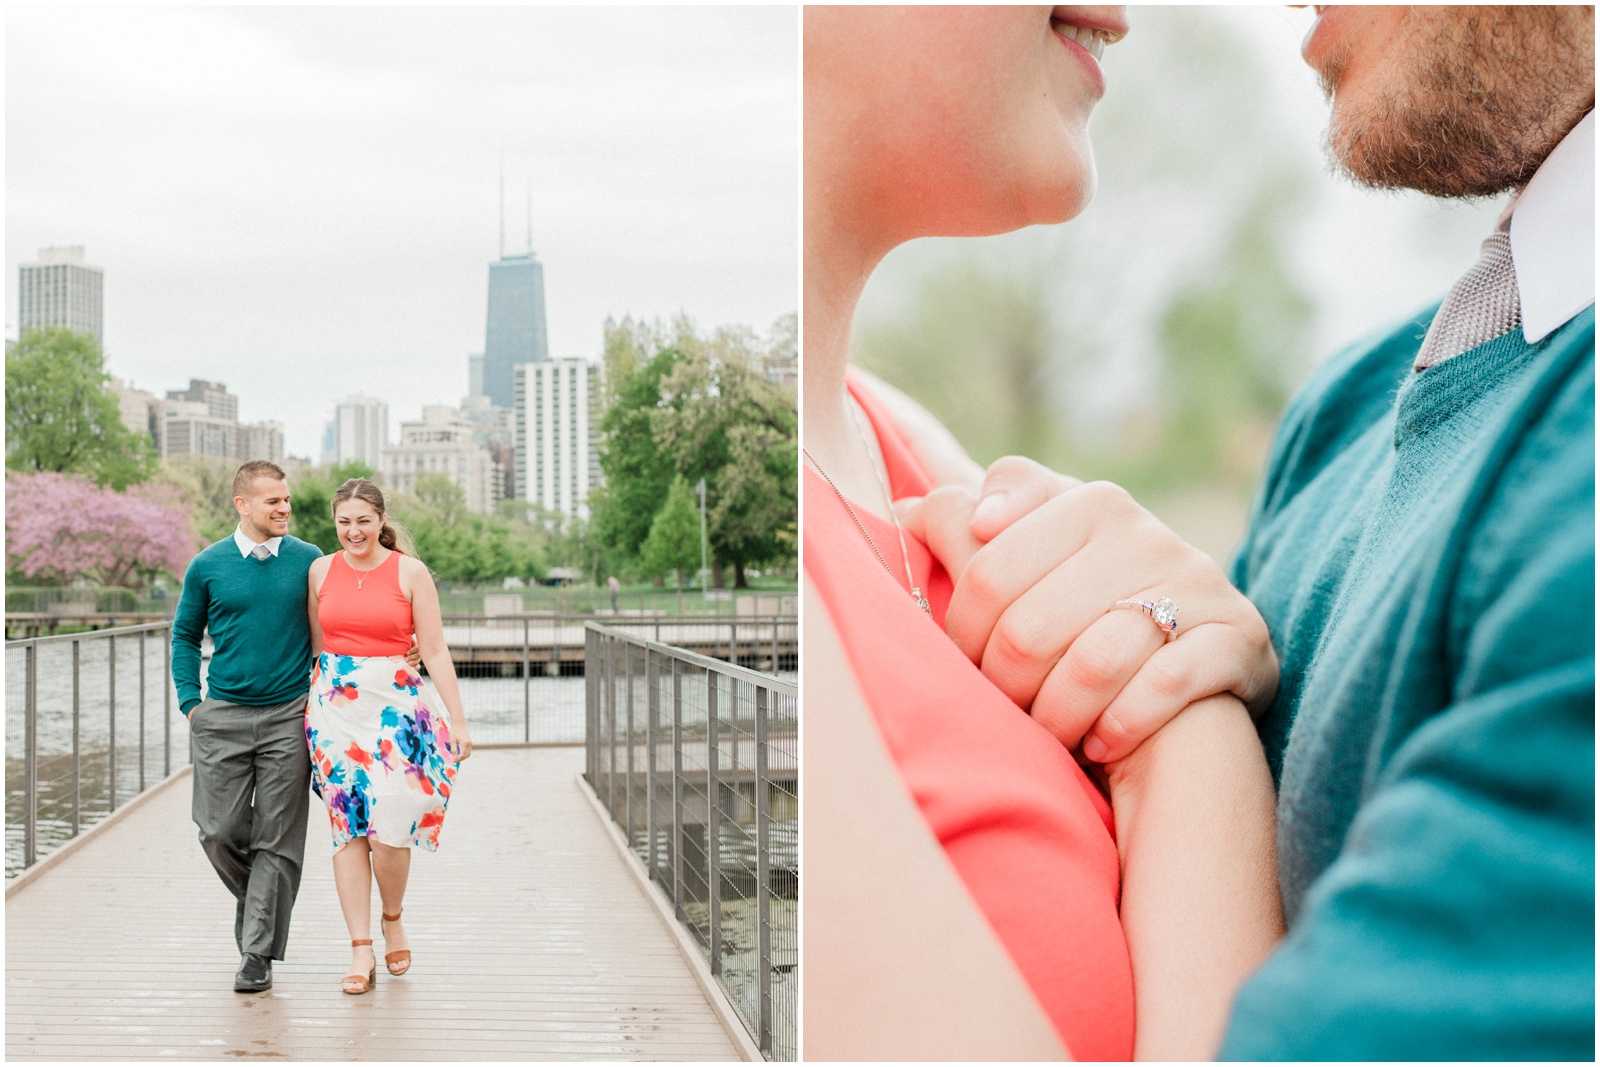 Colorful Spring Engagement Photos Chicago Lincoln Park | Couple walking by a pond